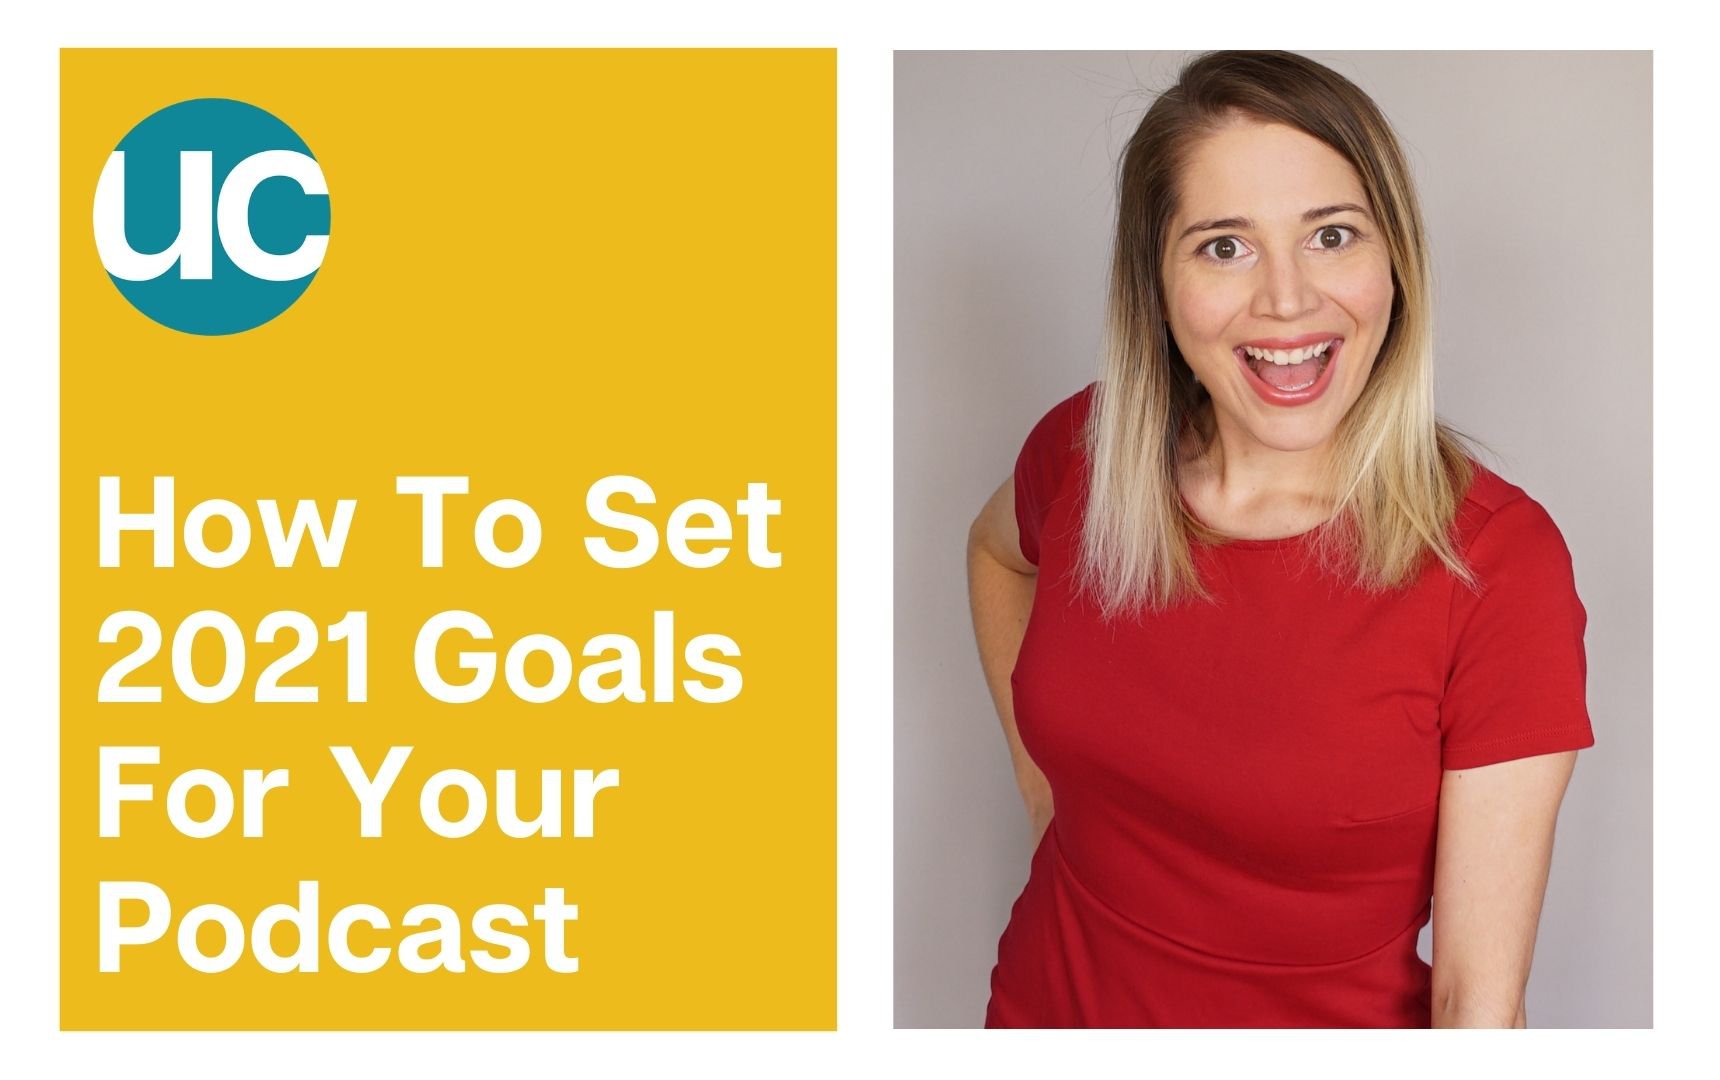 How To Set 2021 Goals For Your Podcast